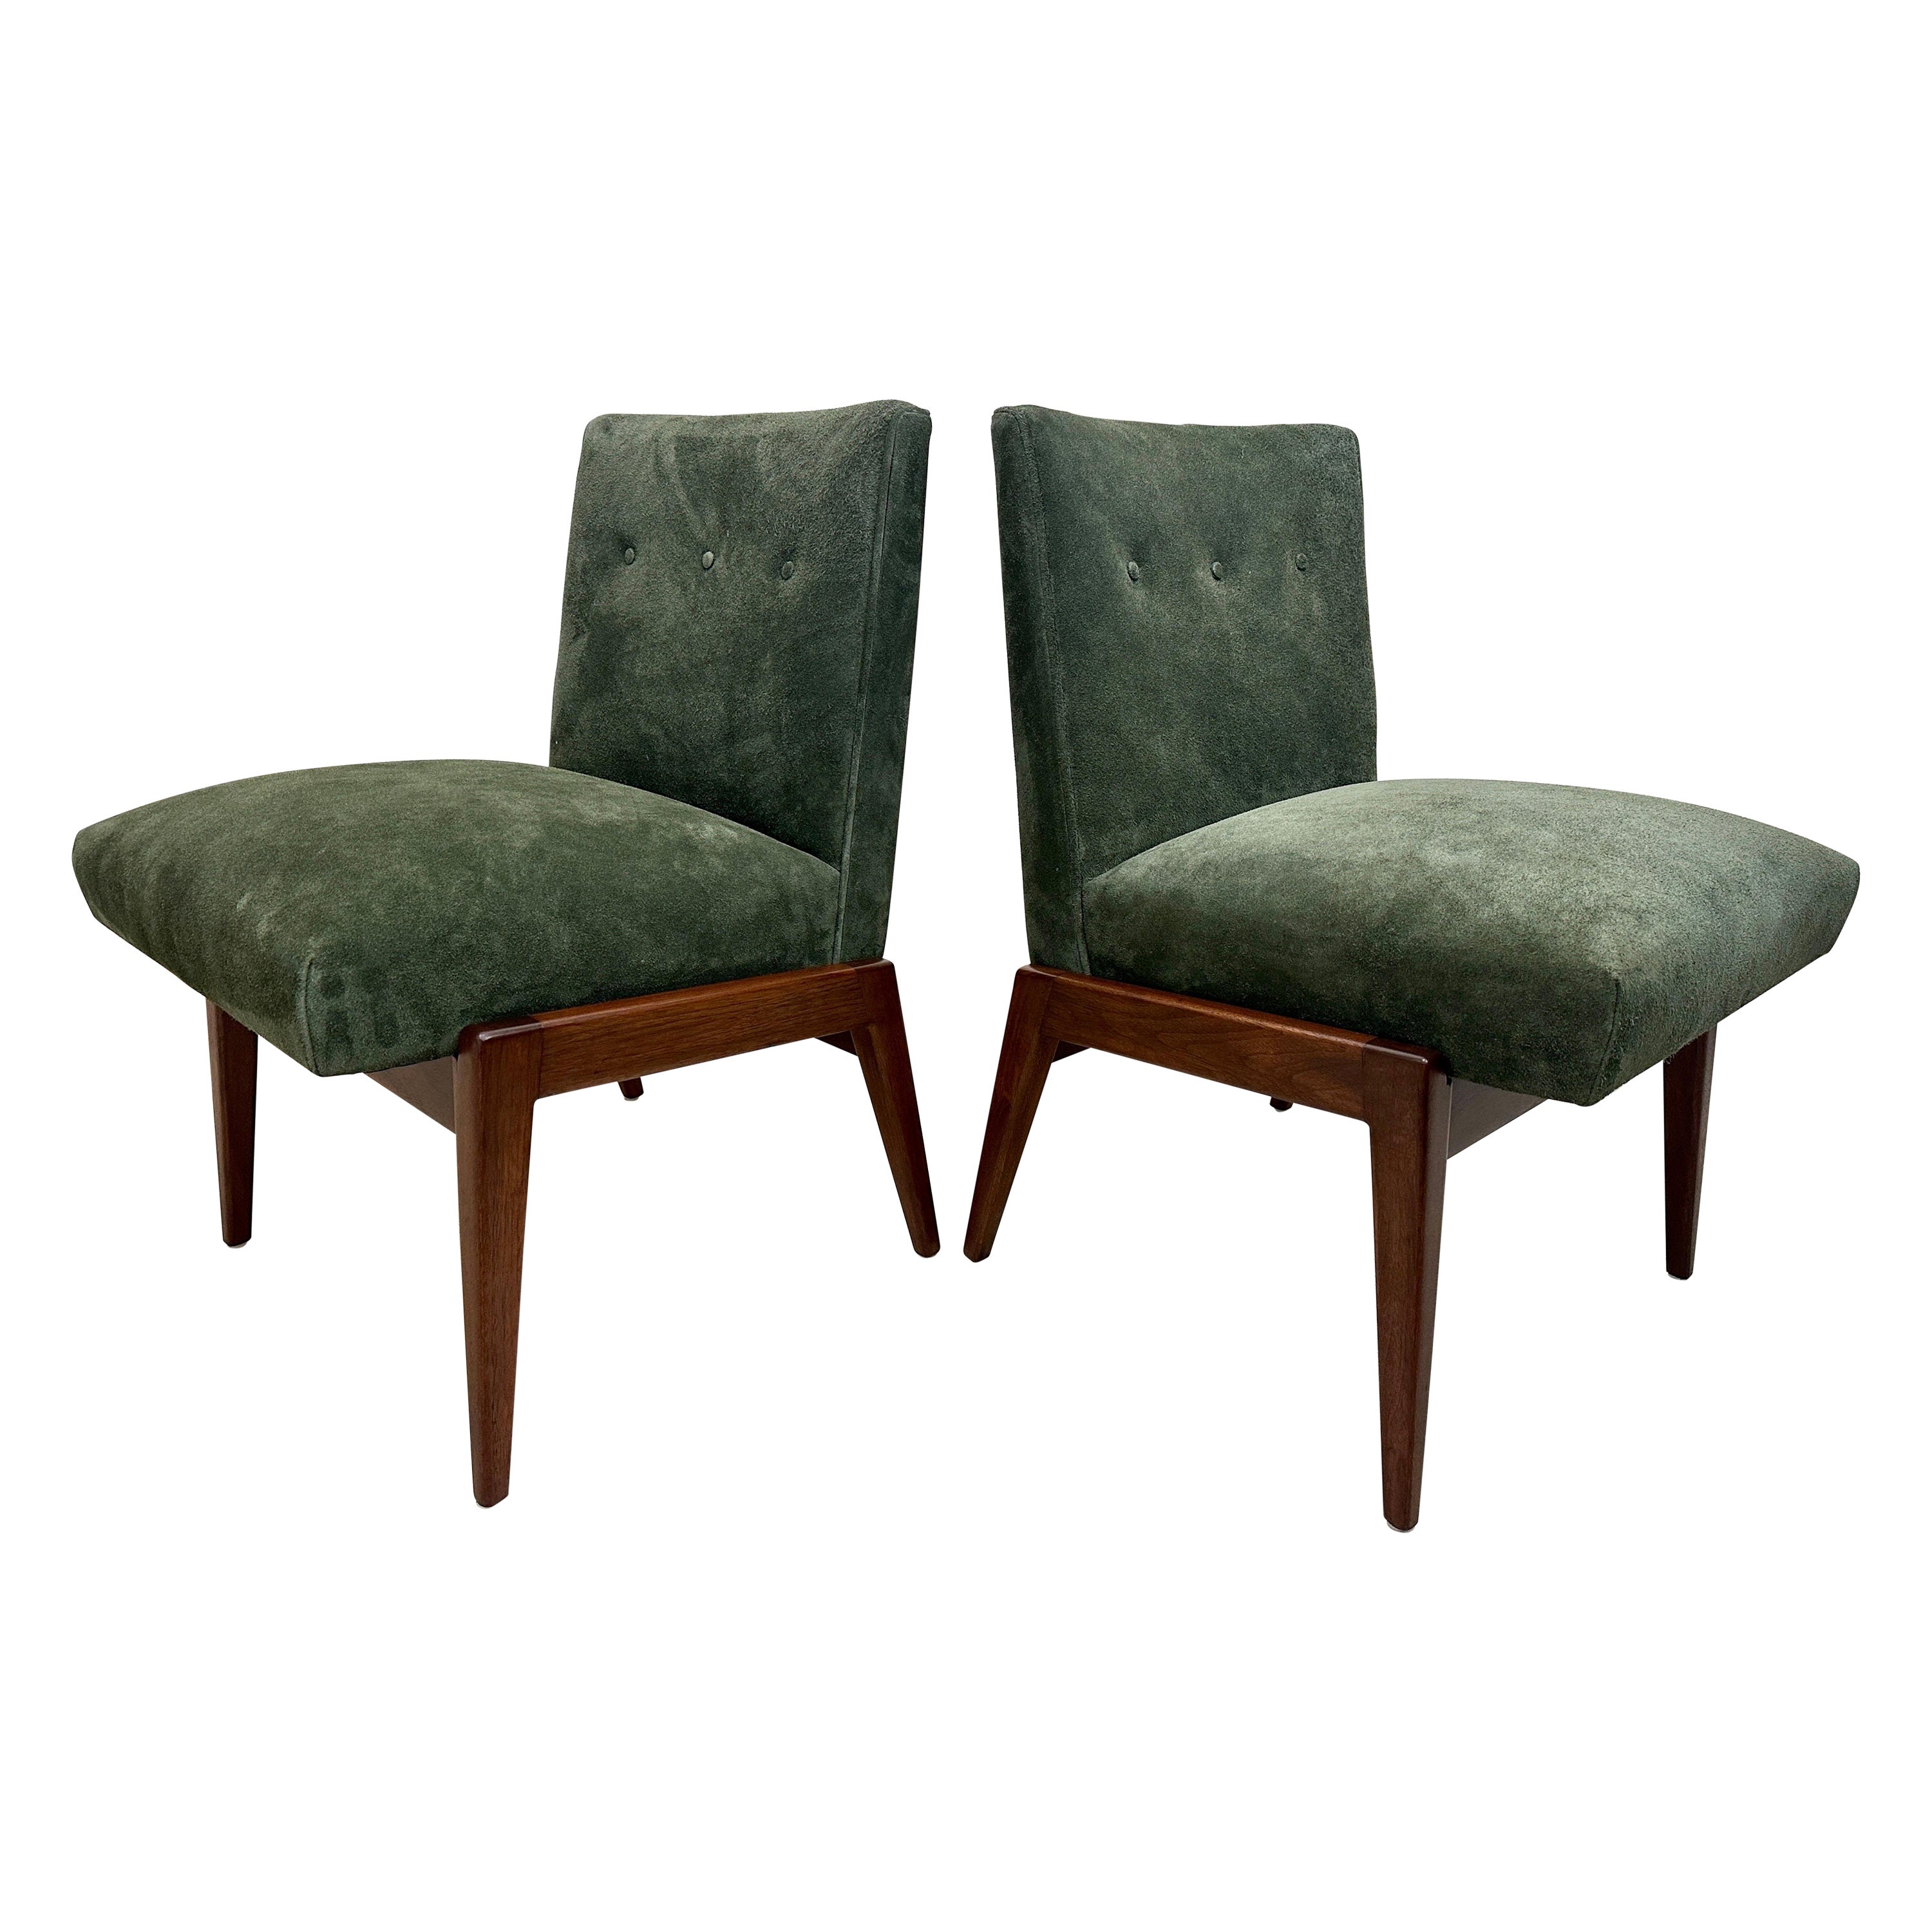 Original Vintage Jens Risom Chairs in Green Suede w/ Label, PAIR For Sale